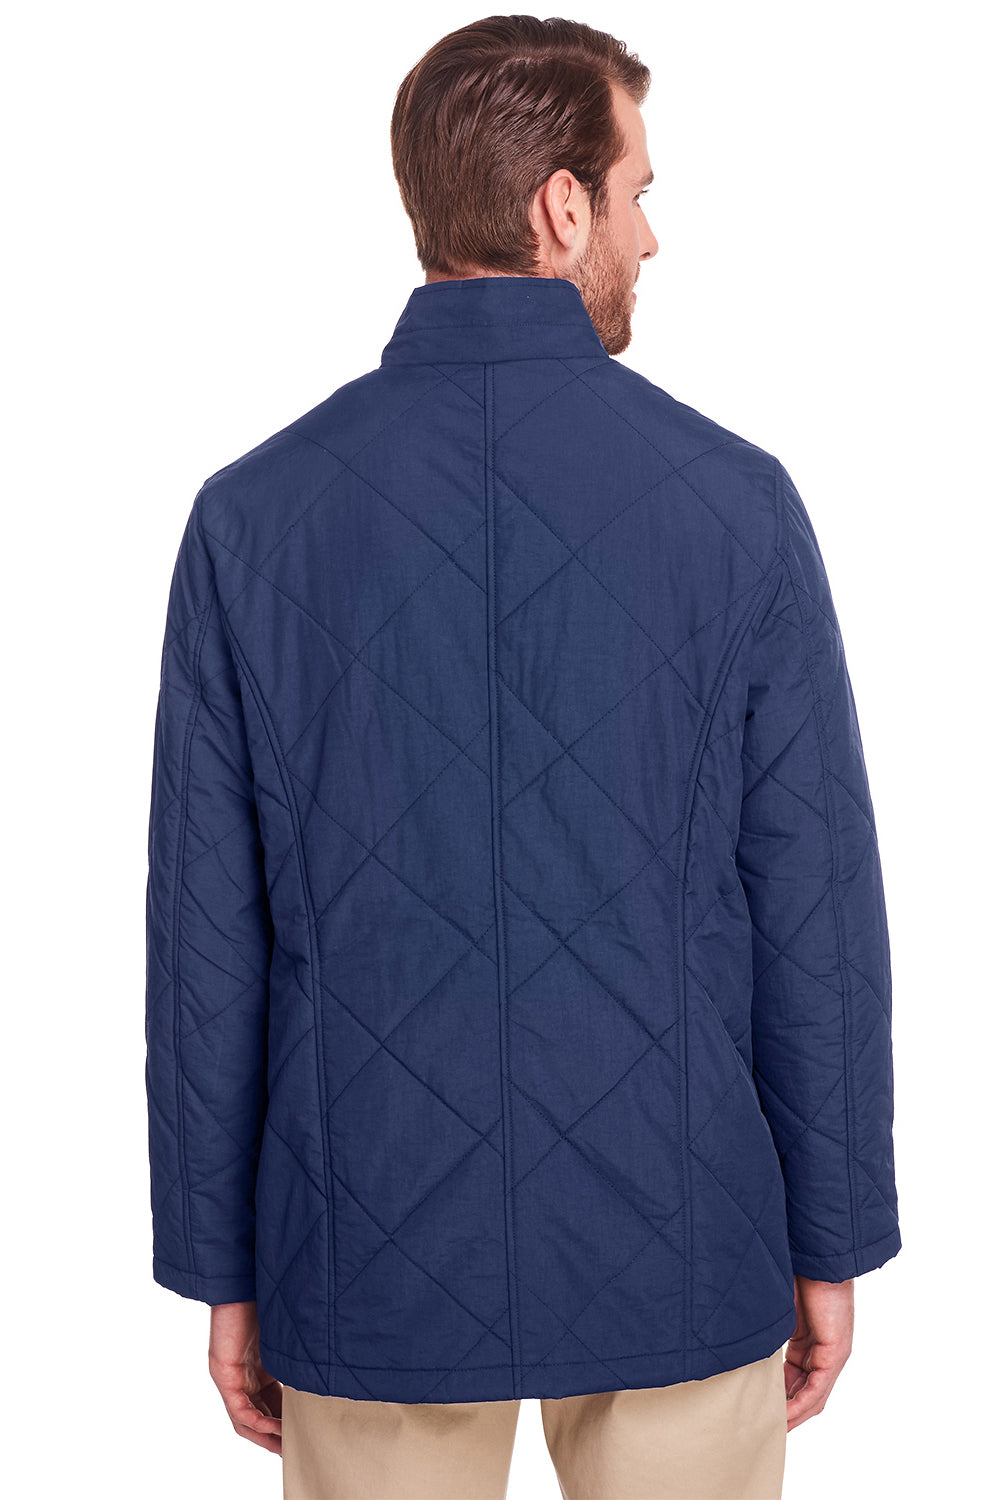 UltraClub UC708 Mens Dawson Quilted Full Zip Jacket Navy Blue Back